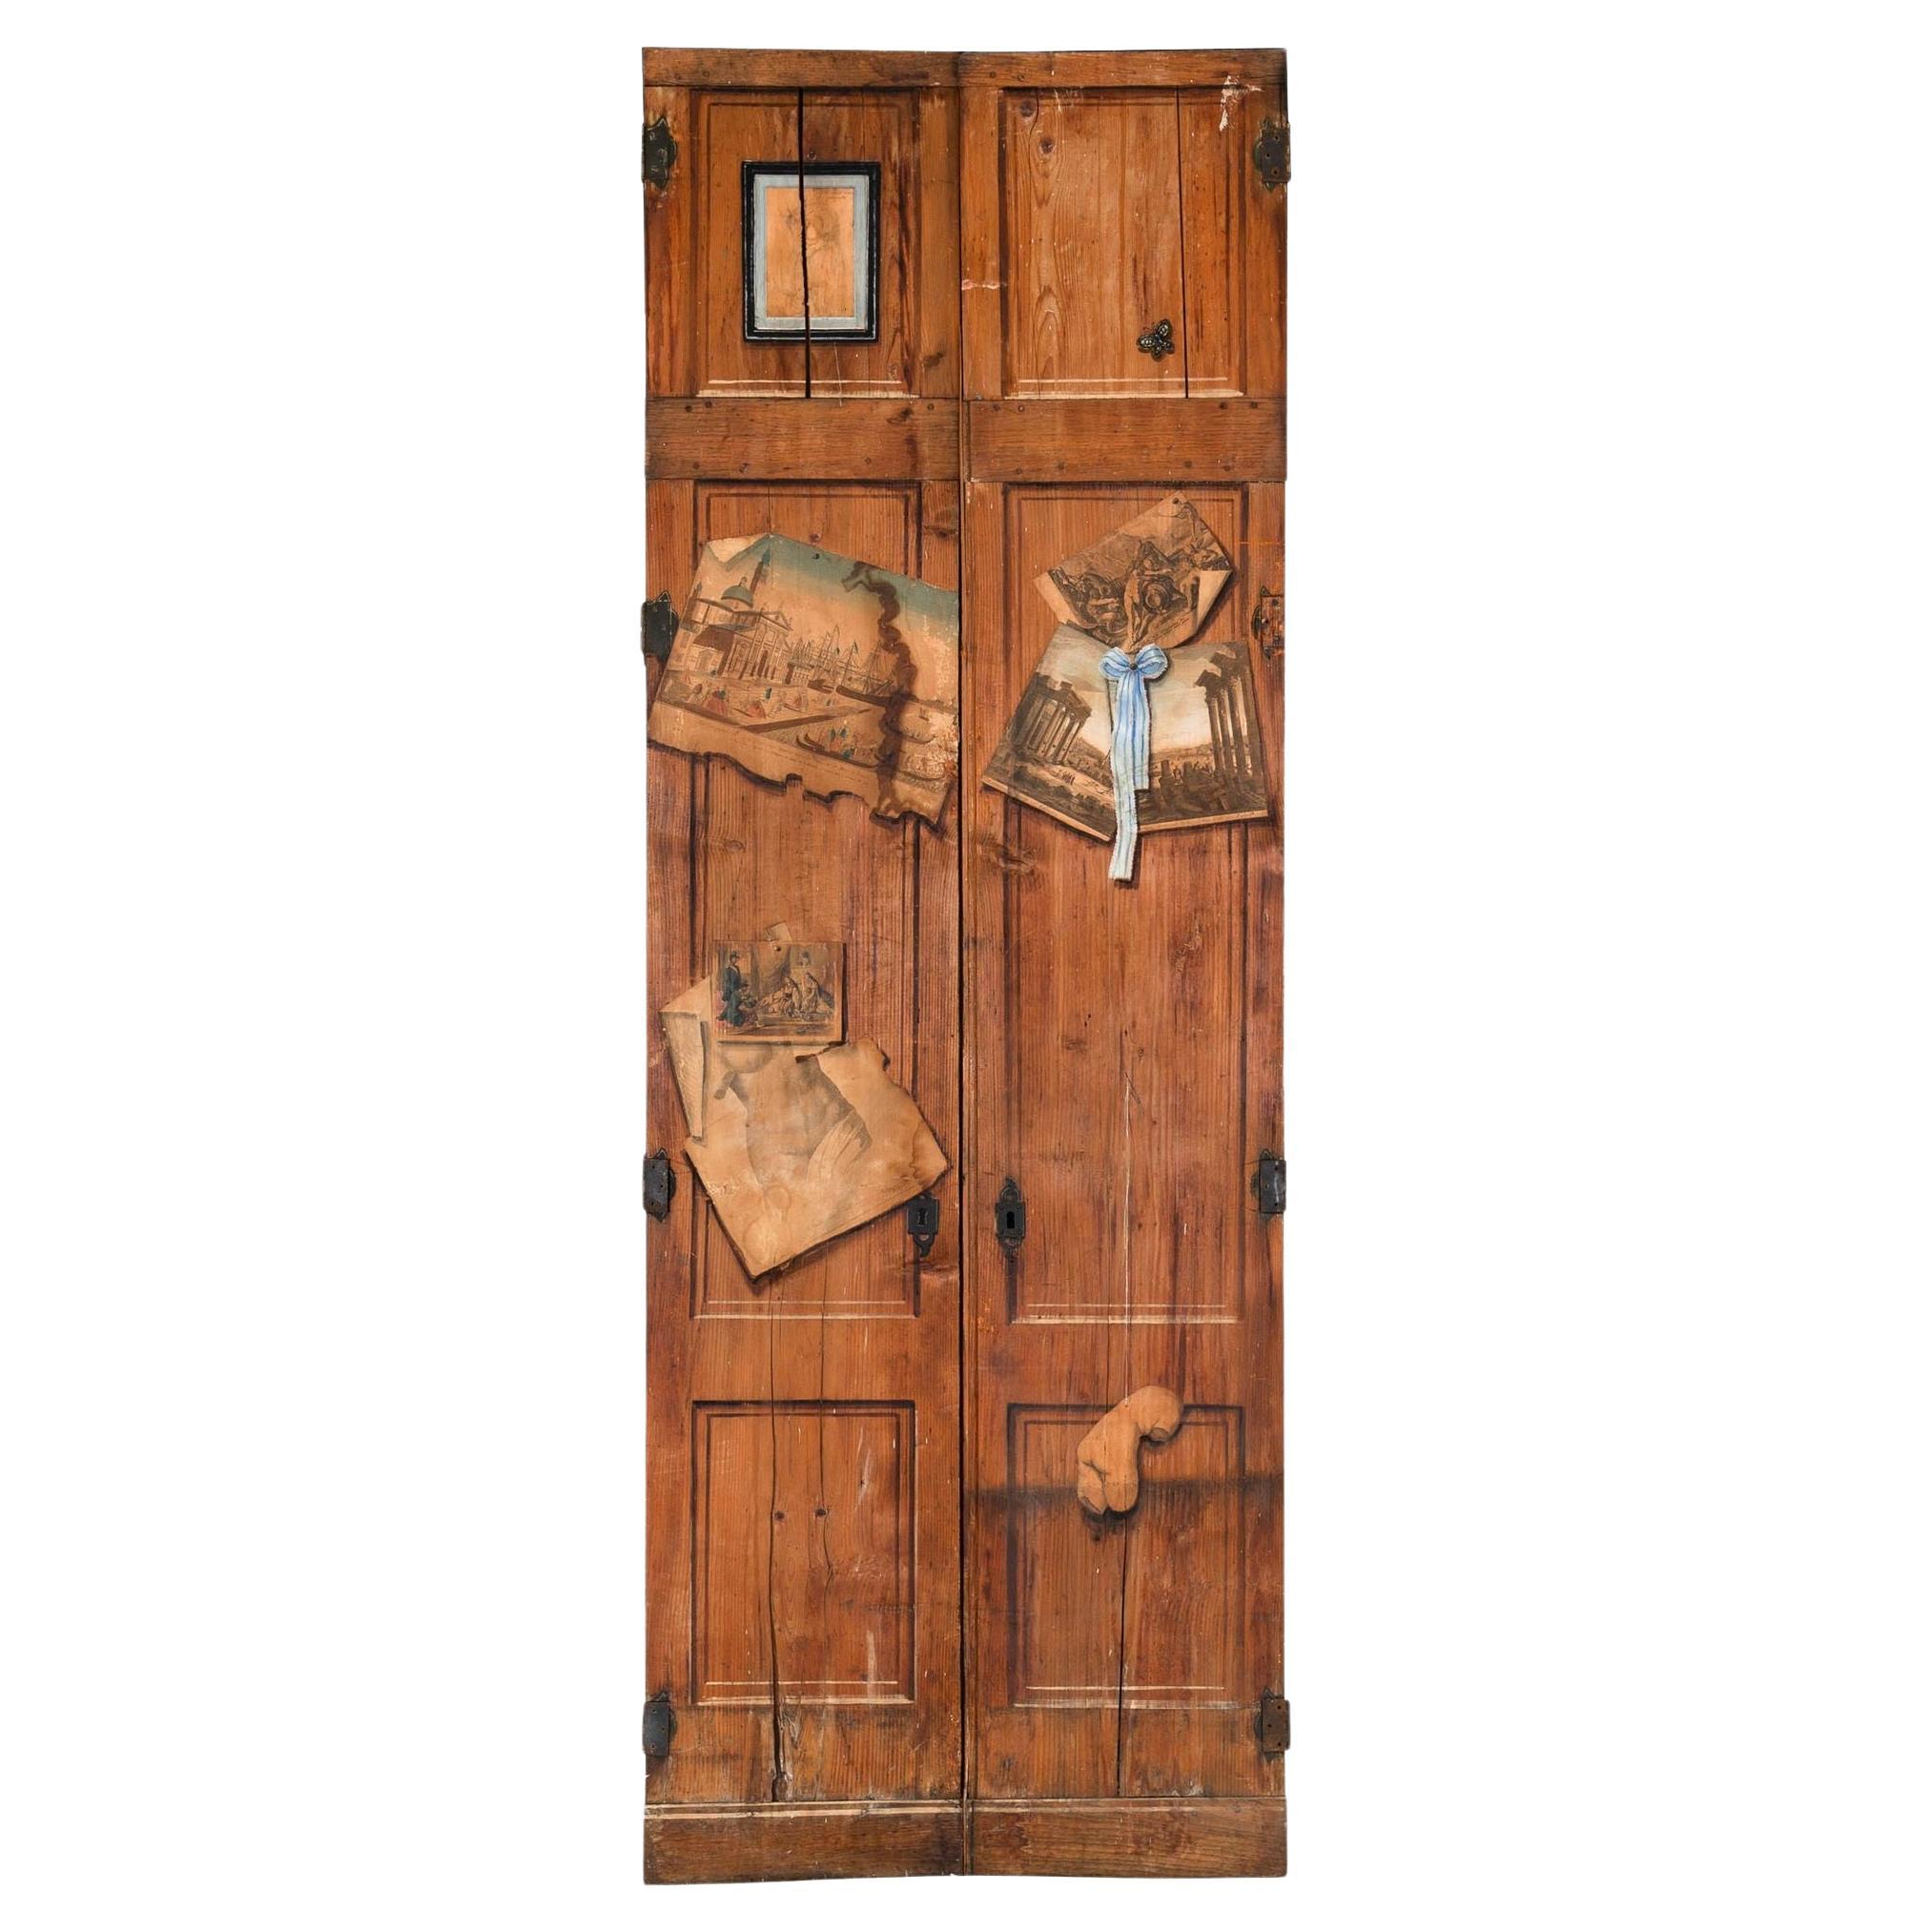 19th Century French Antique Scrubbed Pine Trompe L'oeil Decorated Doors For Sale